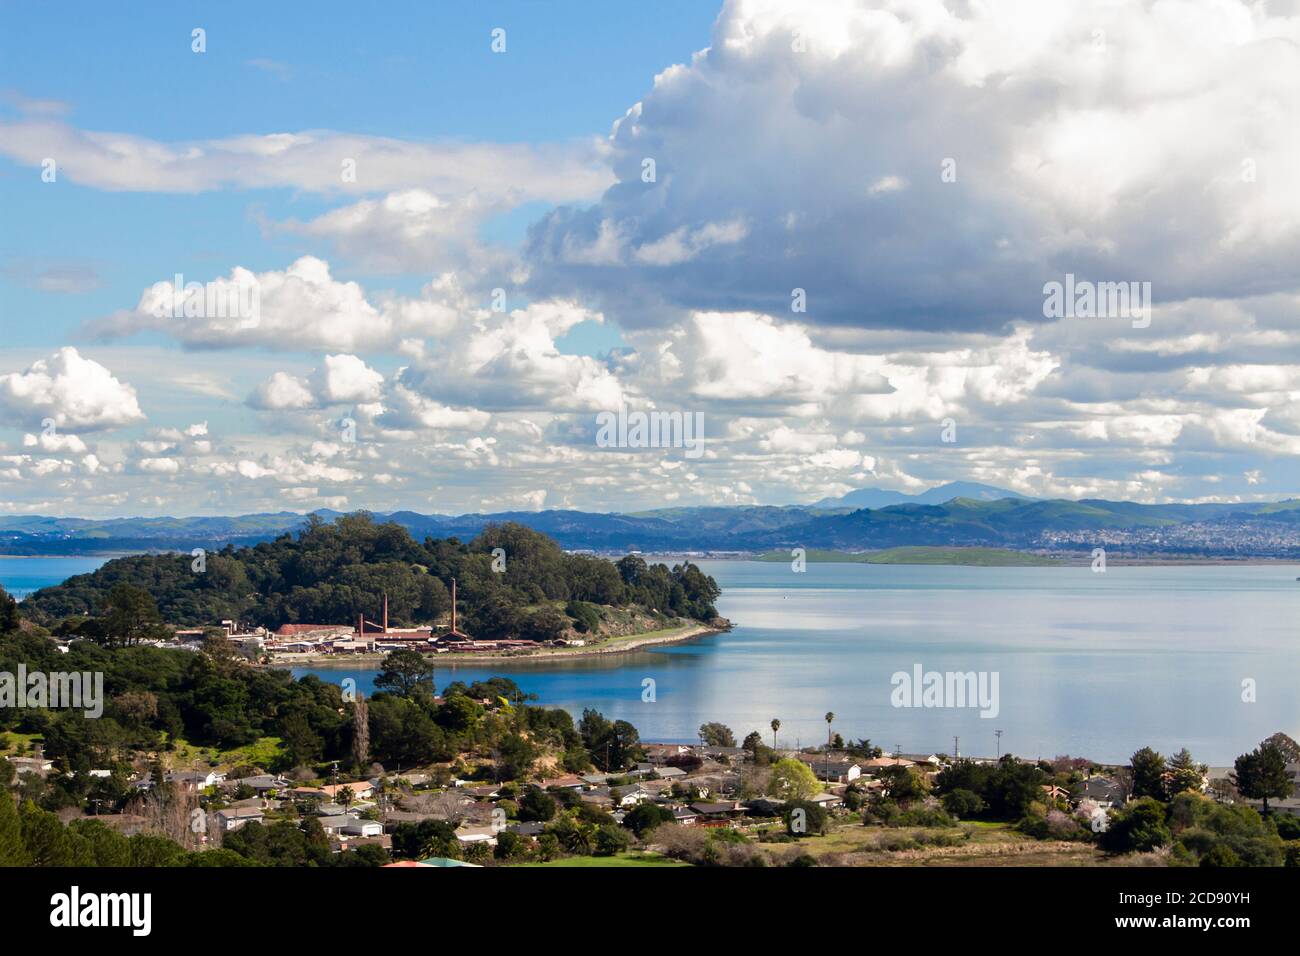 Massive clouds sweep through blue skies over the San Rafael Bay section of San Francisco Bay with neighborhoods, rock quarry and calm blue waters Stock Photo